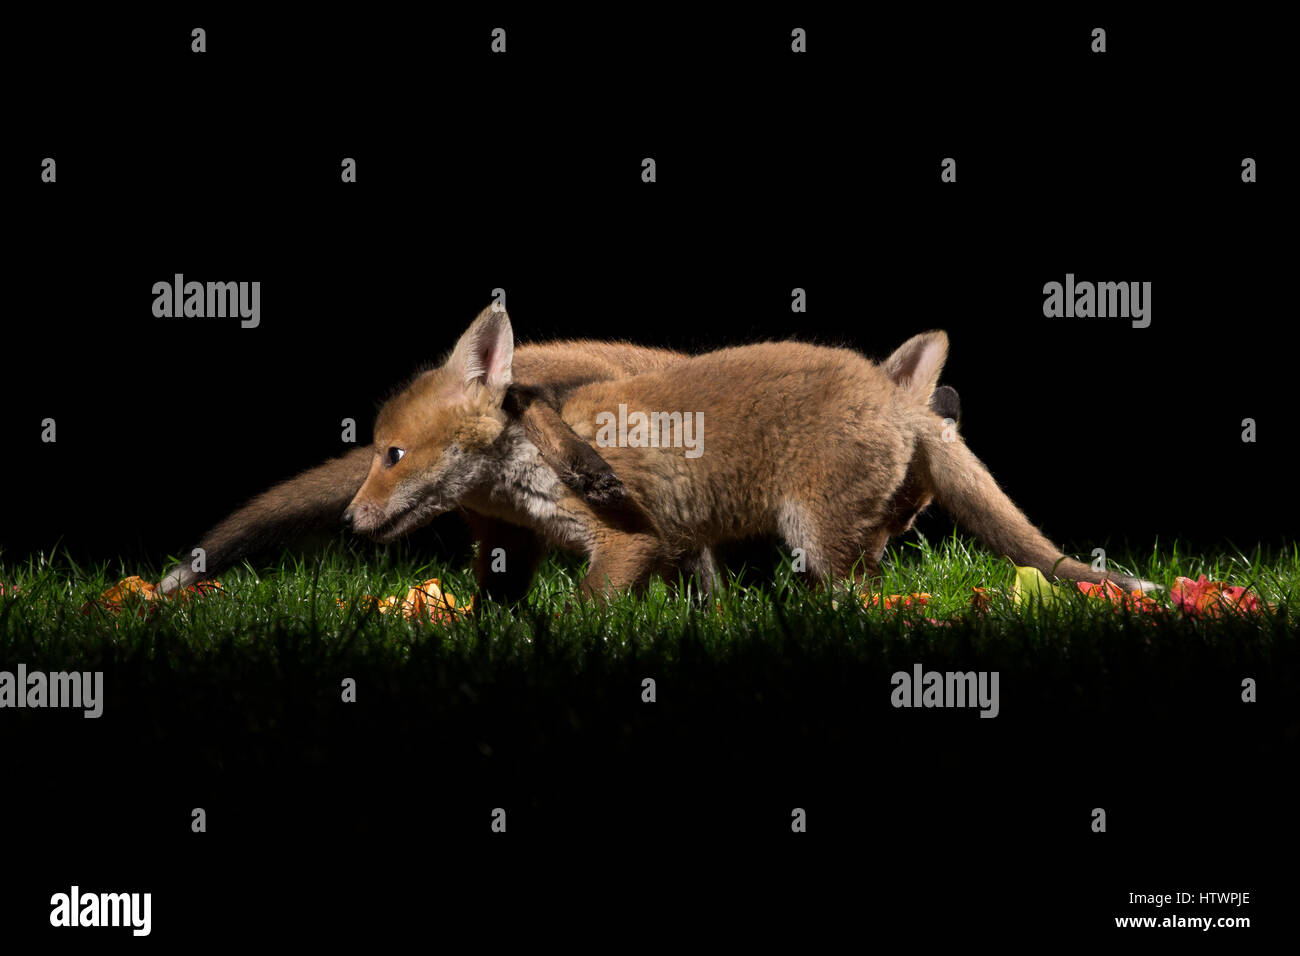 Fox cubs playing in a garden at night Stock Photo